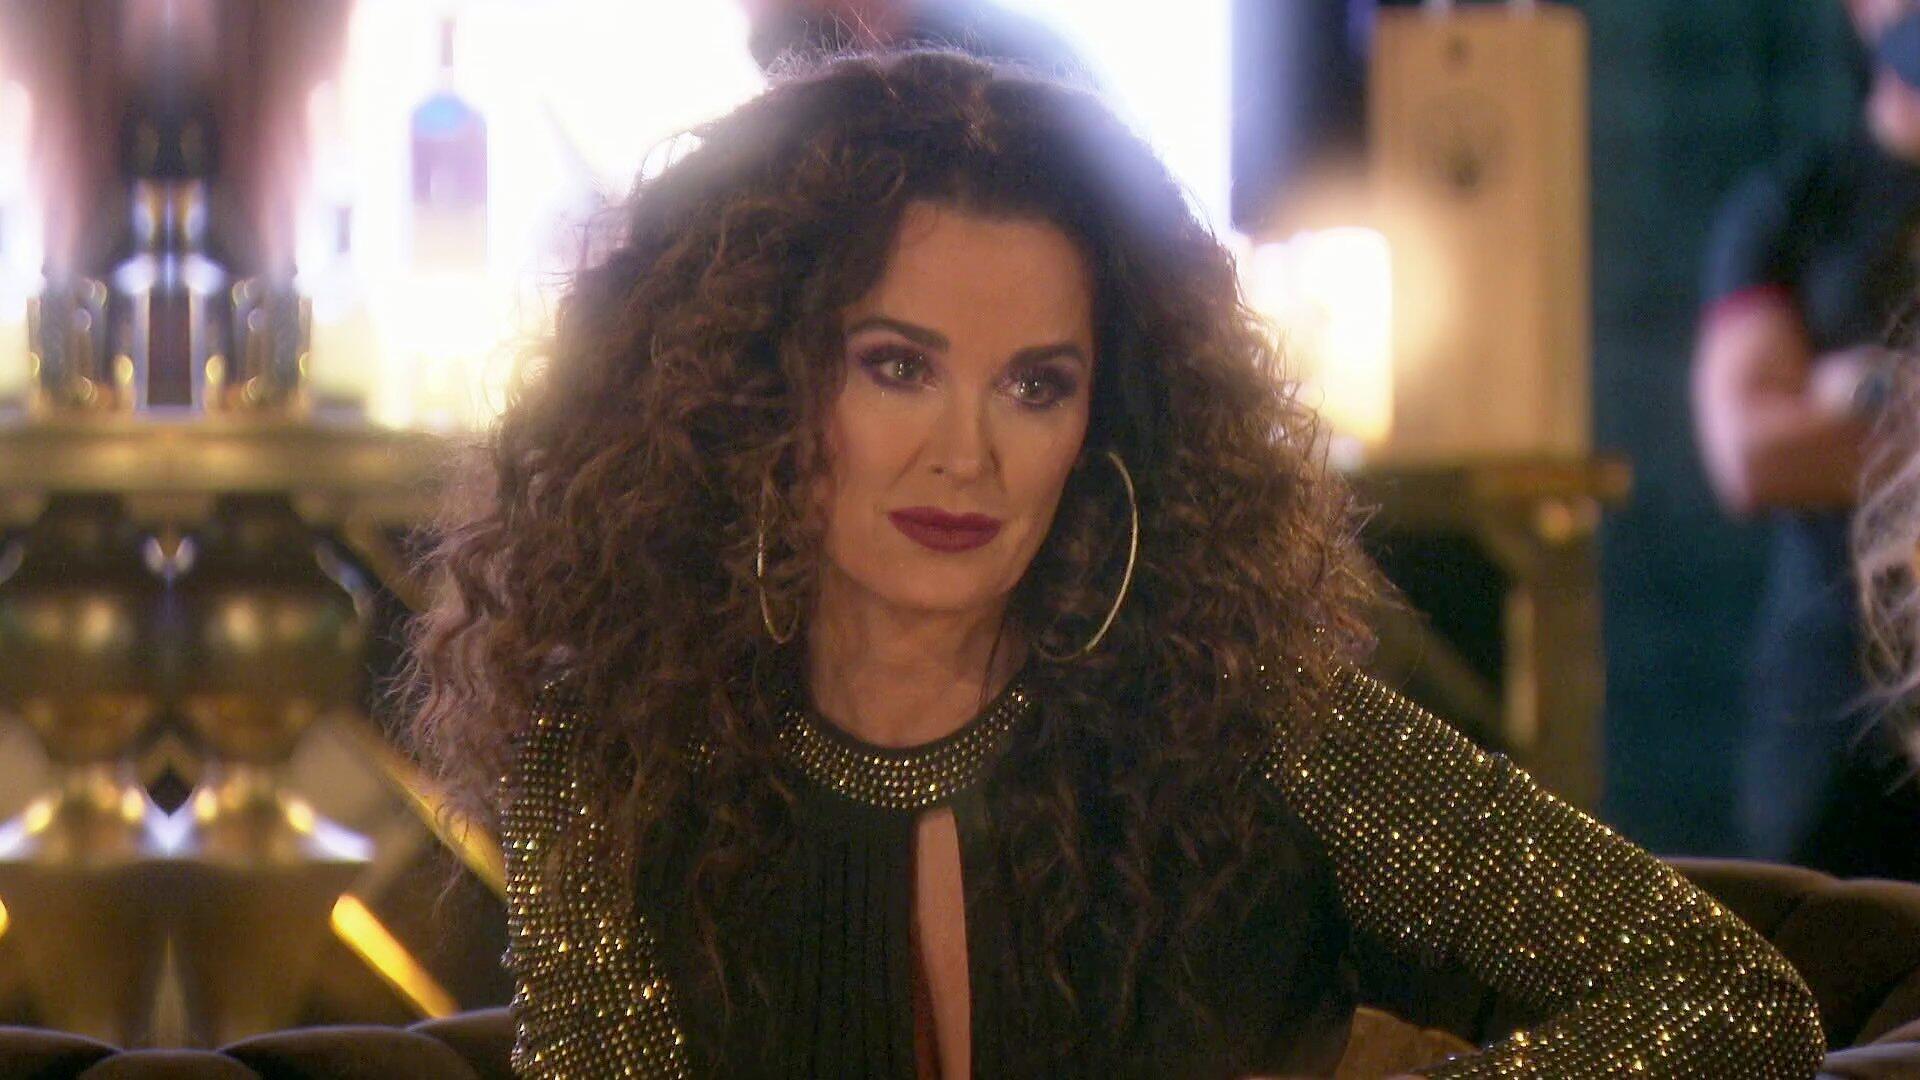 Kyle Richards - The Real Housewives of Beverly Hills | Season 12 Episode 15 | Kyle Richards style